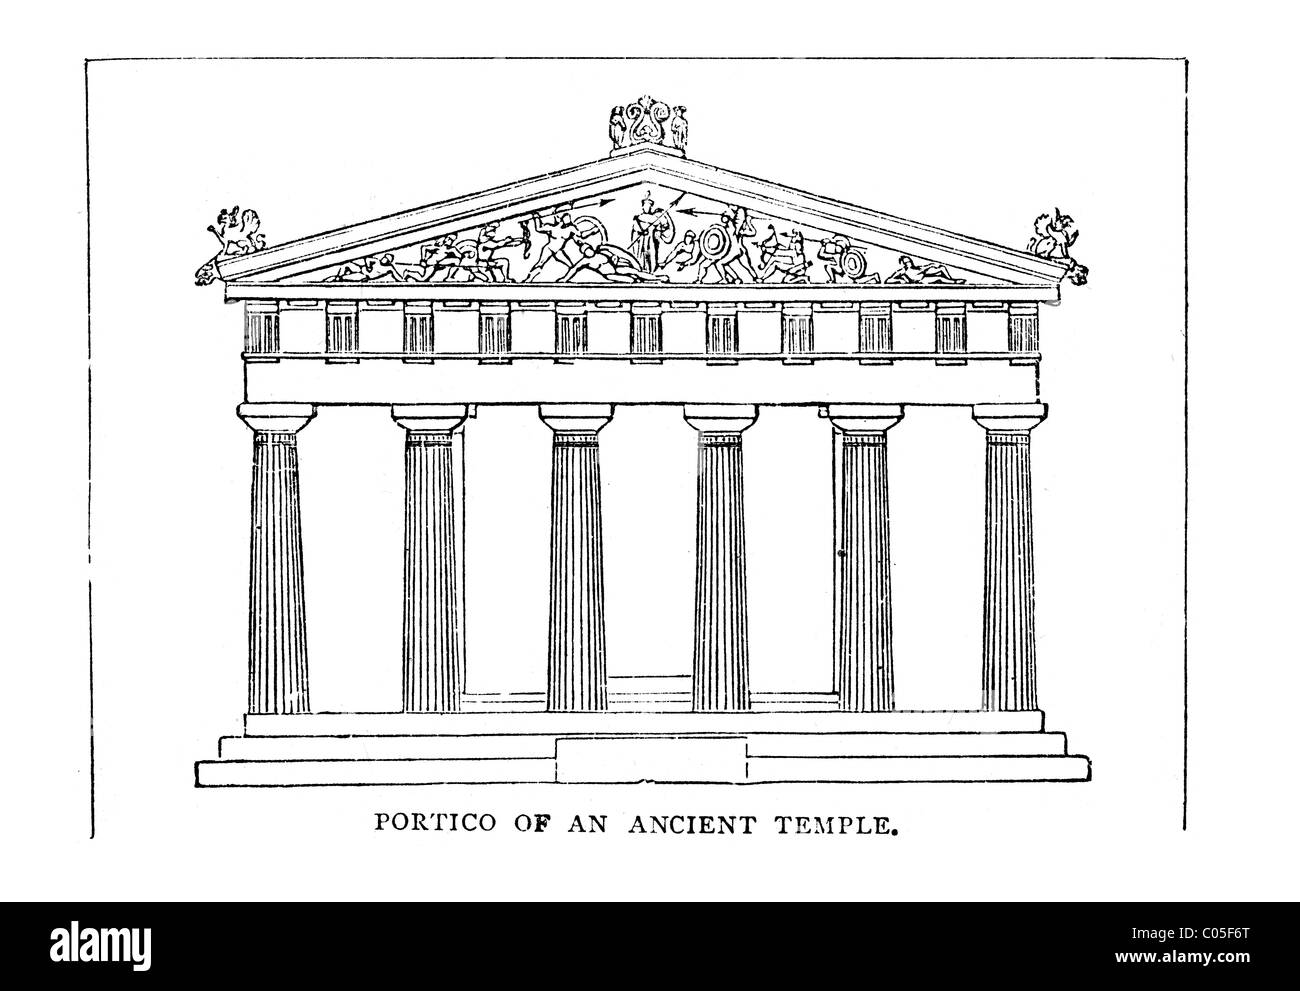 Vintage engraving showing the Portico of an ancient Greek or Roman Temple Stock Photo